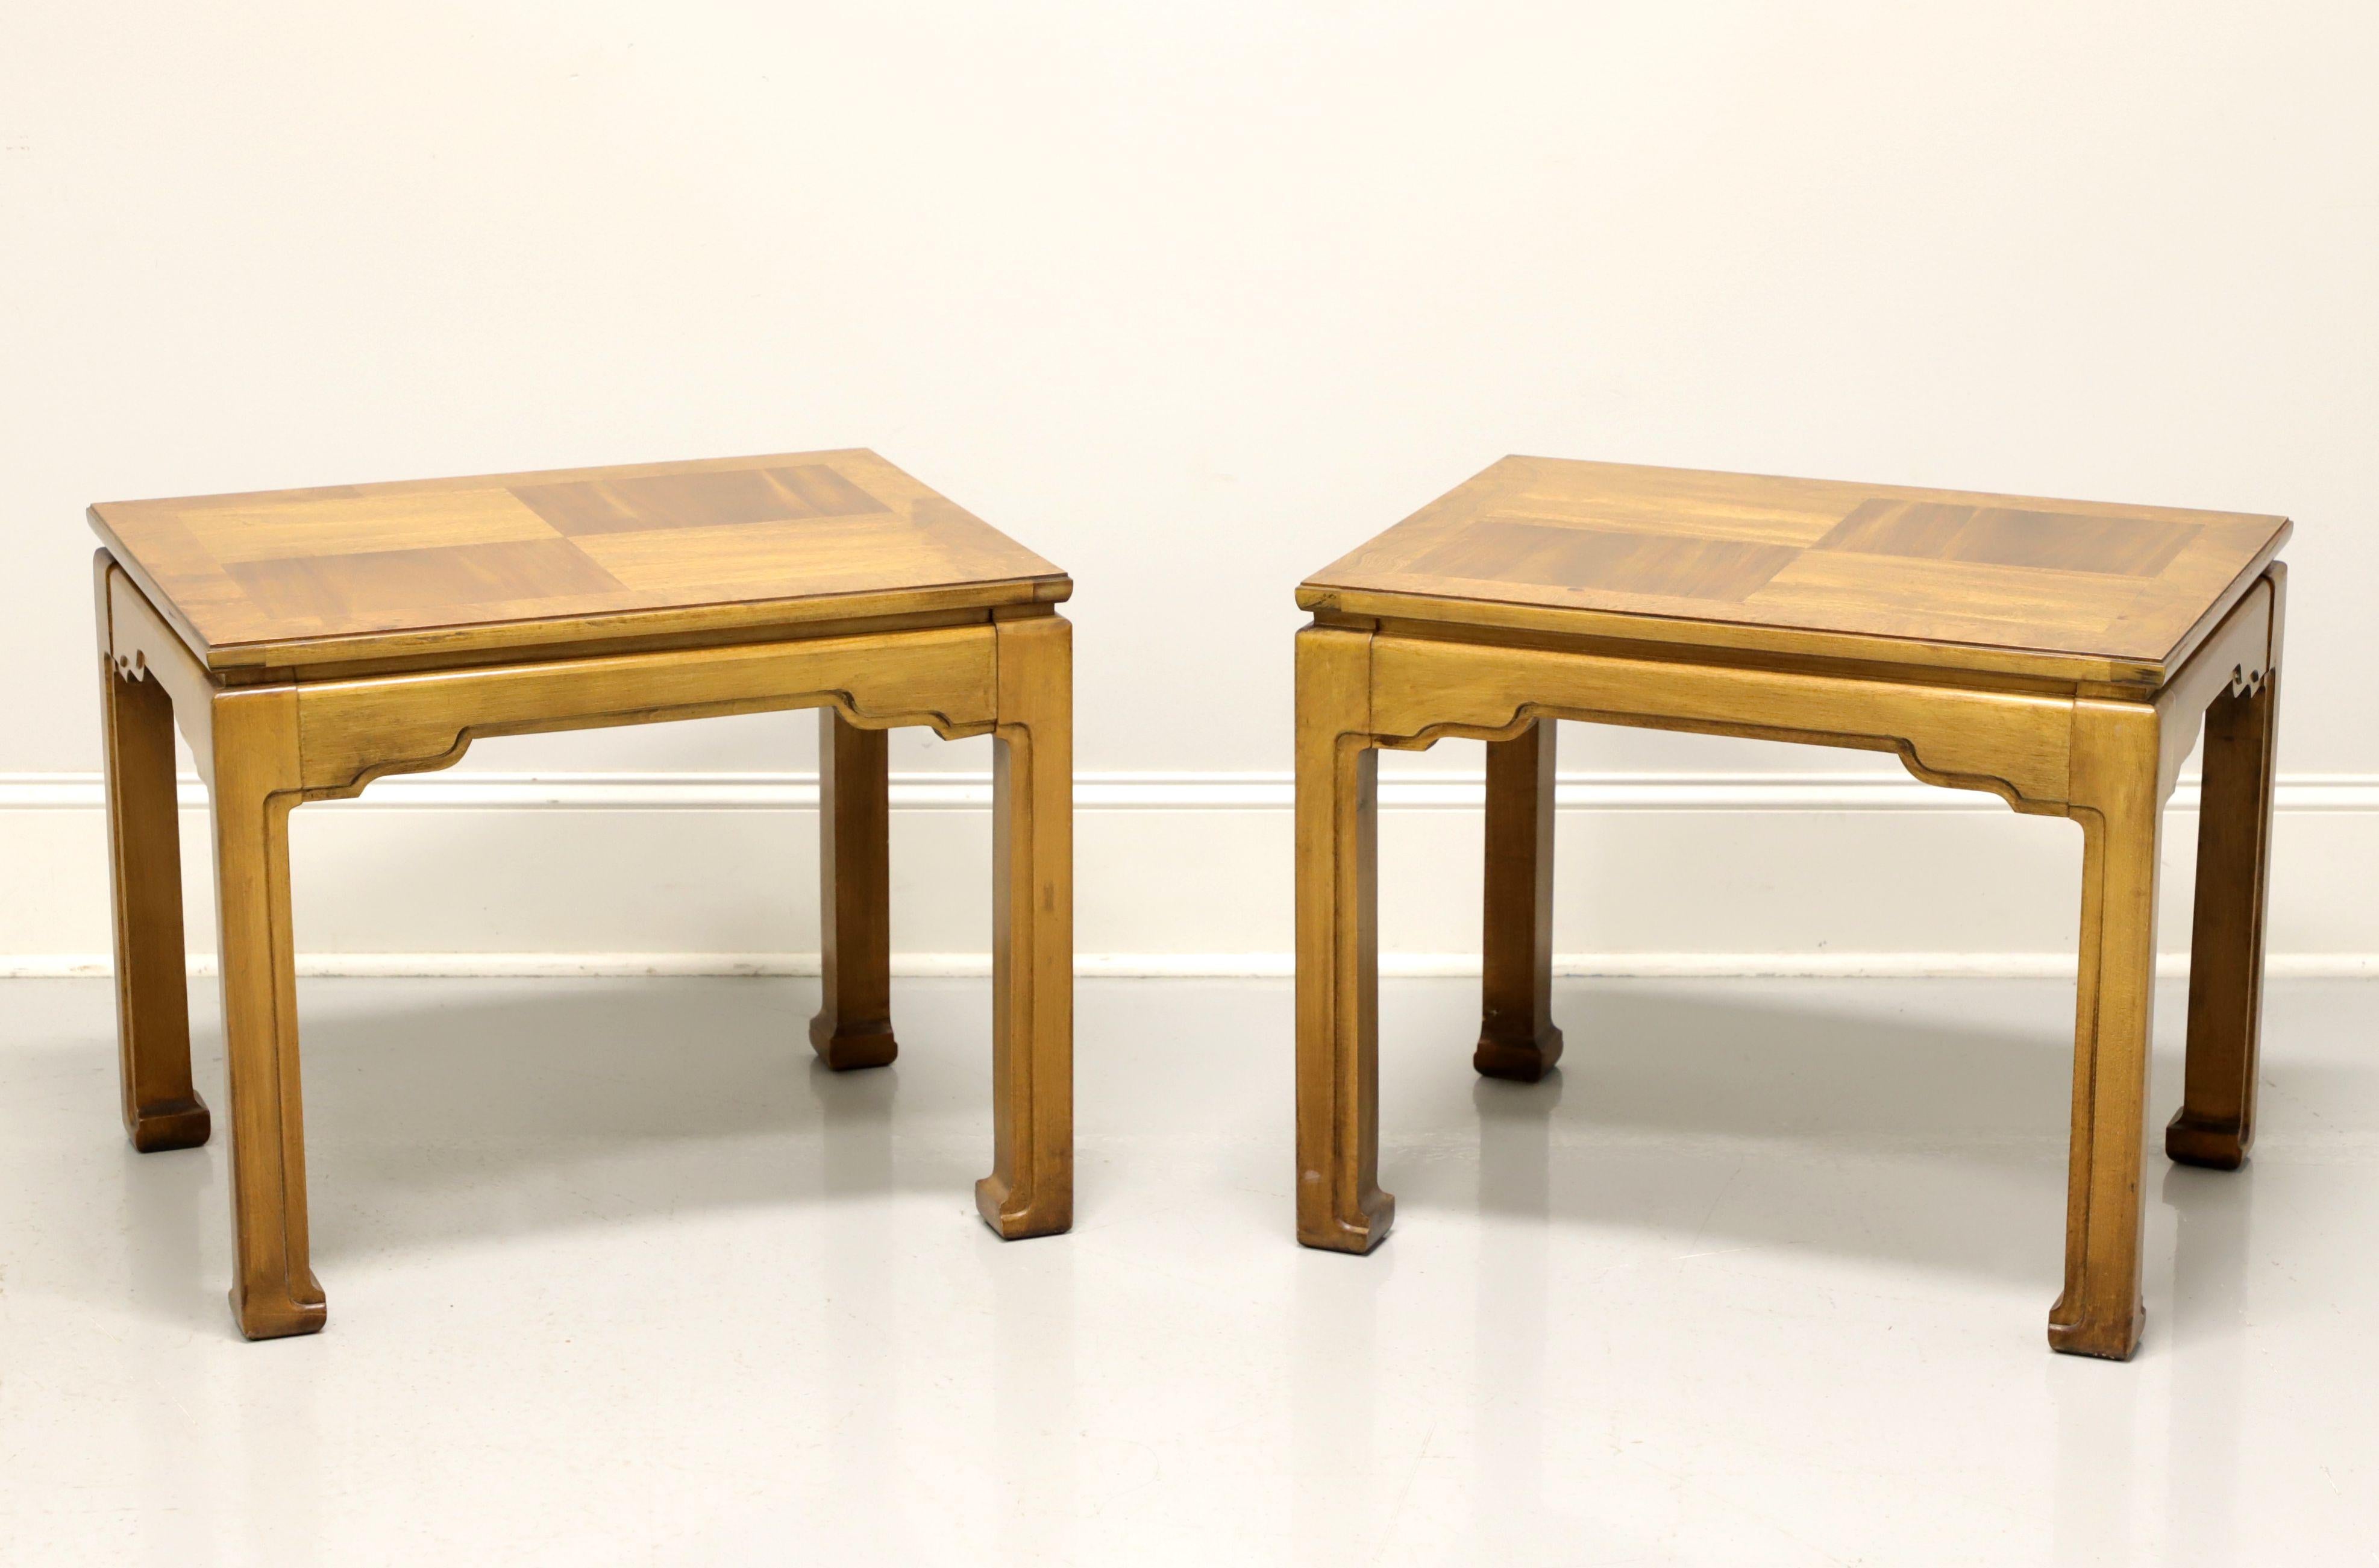 A pair of Asian Ming influenced side tables by Thomasville. Oak with burl oak parquetry design to top, Ming style apron and legs. Made in North Carolina, USA, circa 1988.

Style #:  10831-210

Measures: 20W 26D 21.25H

Exceptionally good condition